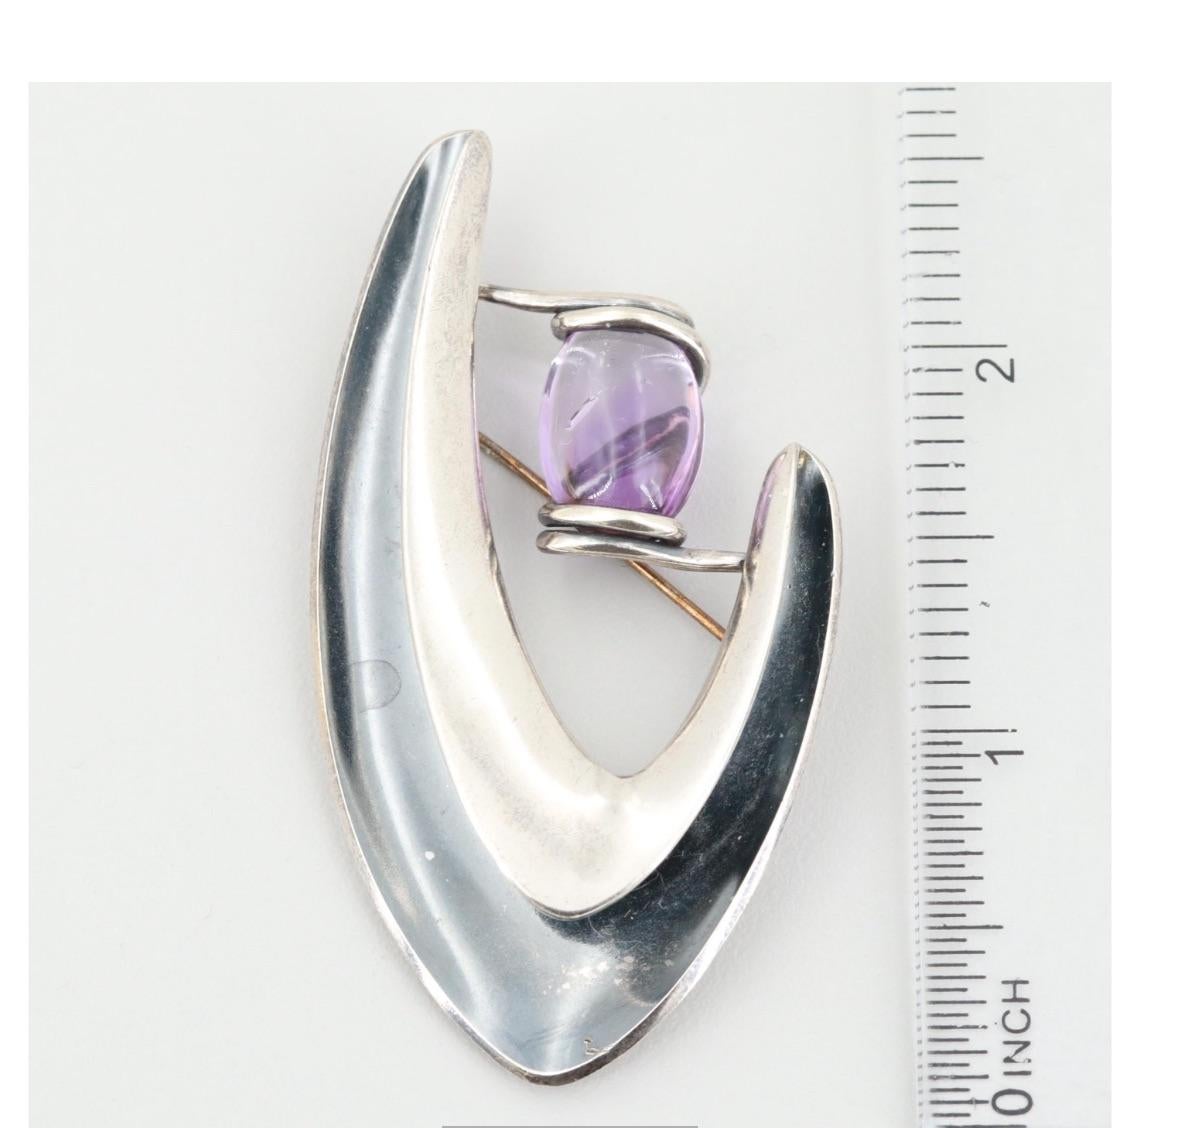 Vintage Modernist Sterling Silver Brooch by Legendary Mexico Artisan Sigi Pineda with a Large Amethyst Center Stone.
A Distinctive Refined Piece to Wear Proudly in Style.

Sigi has worked with silver many years. At age 10, Sigi began to work as an